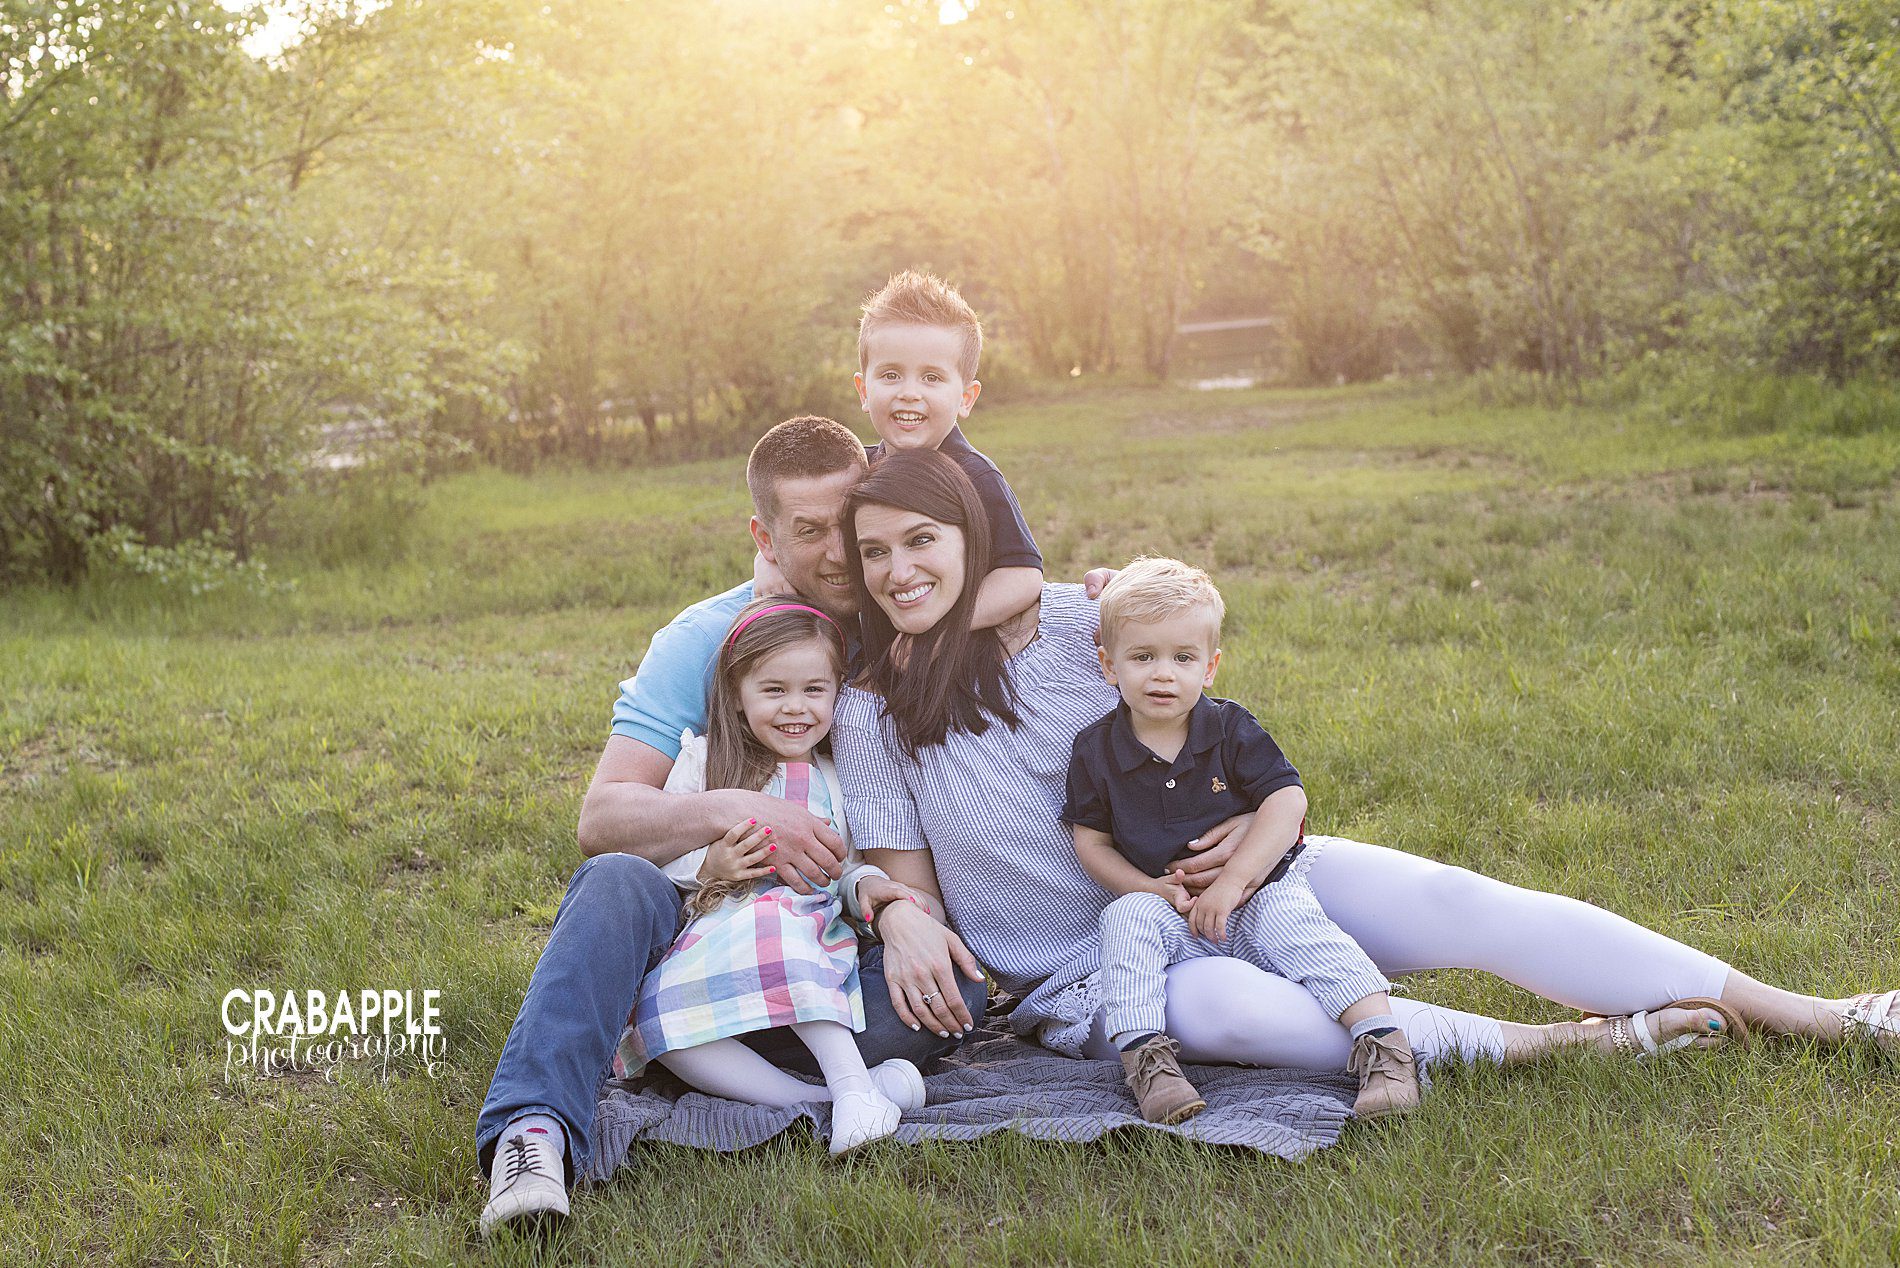 Creative and fun family pictures for spring